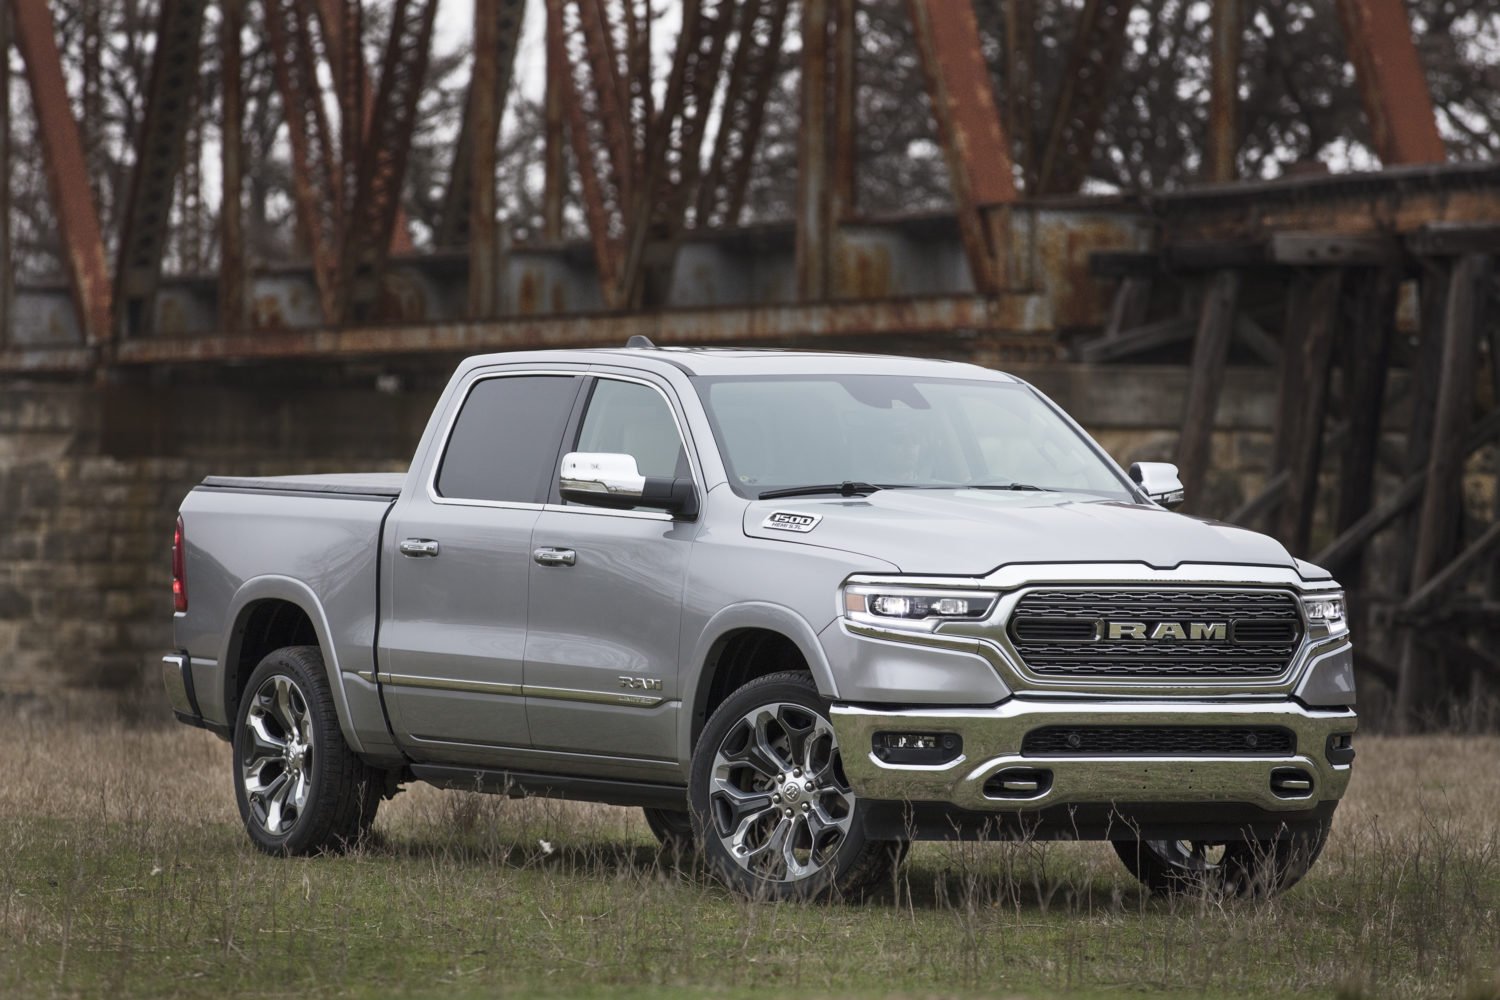 all-new-2019-ram-1500-wins-truck-of-the-year-focus-daily-news